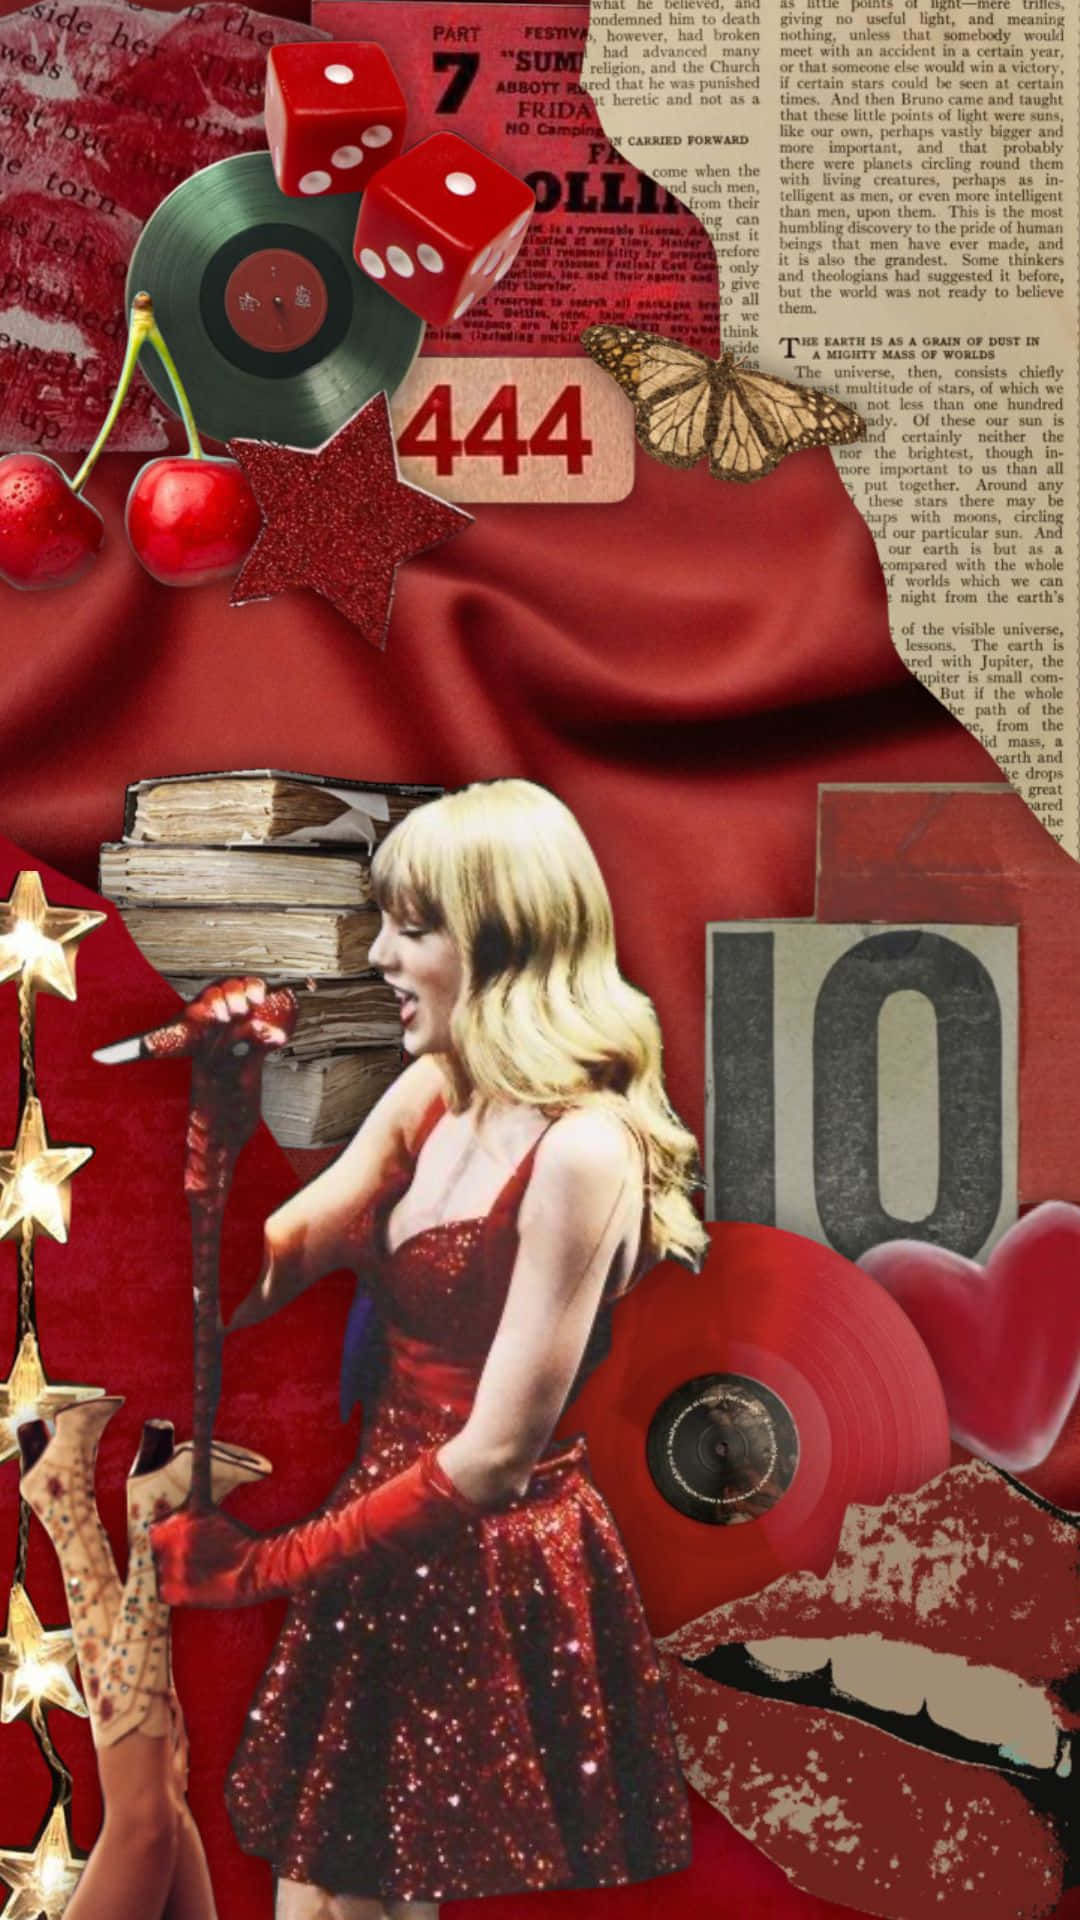 Taylor Swift Red Aesthetic Collage Wallpaper